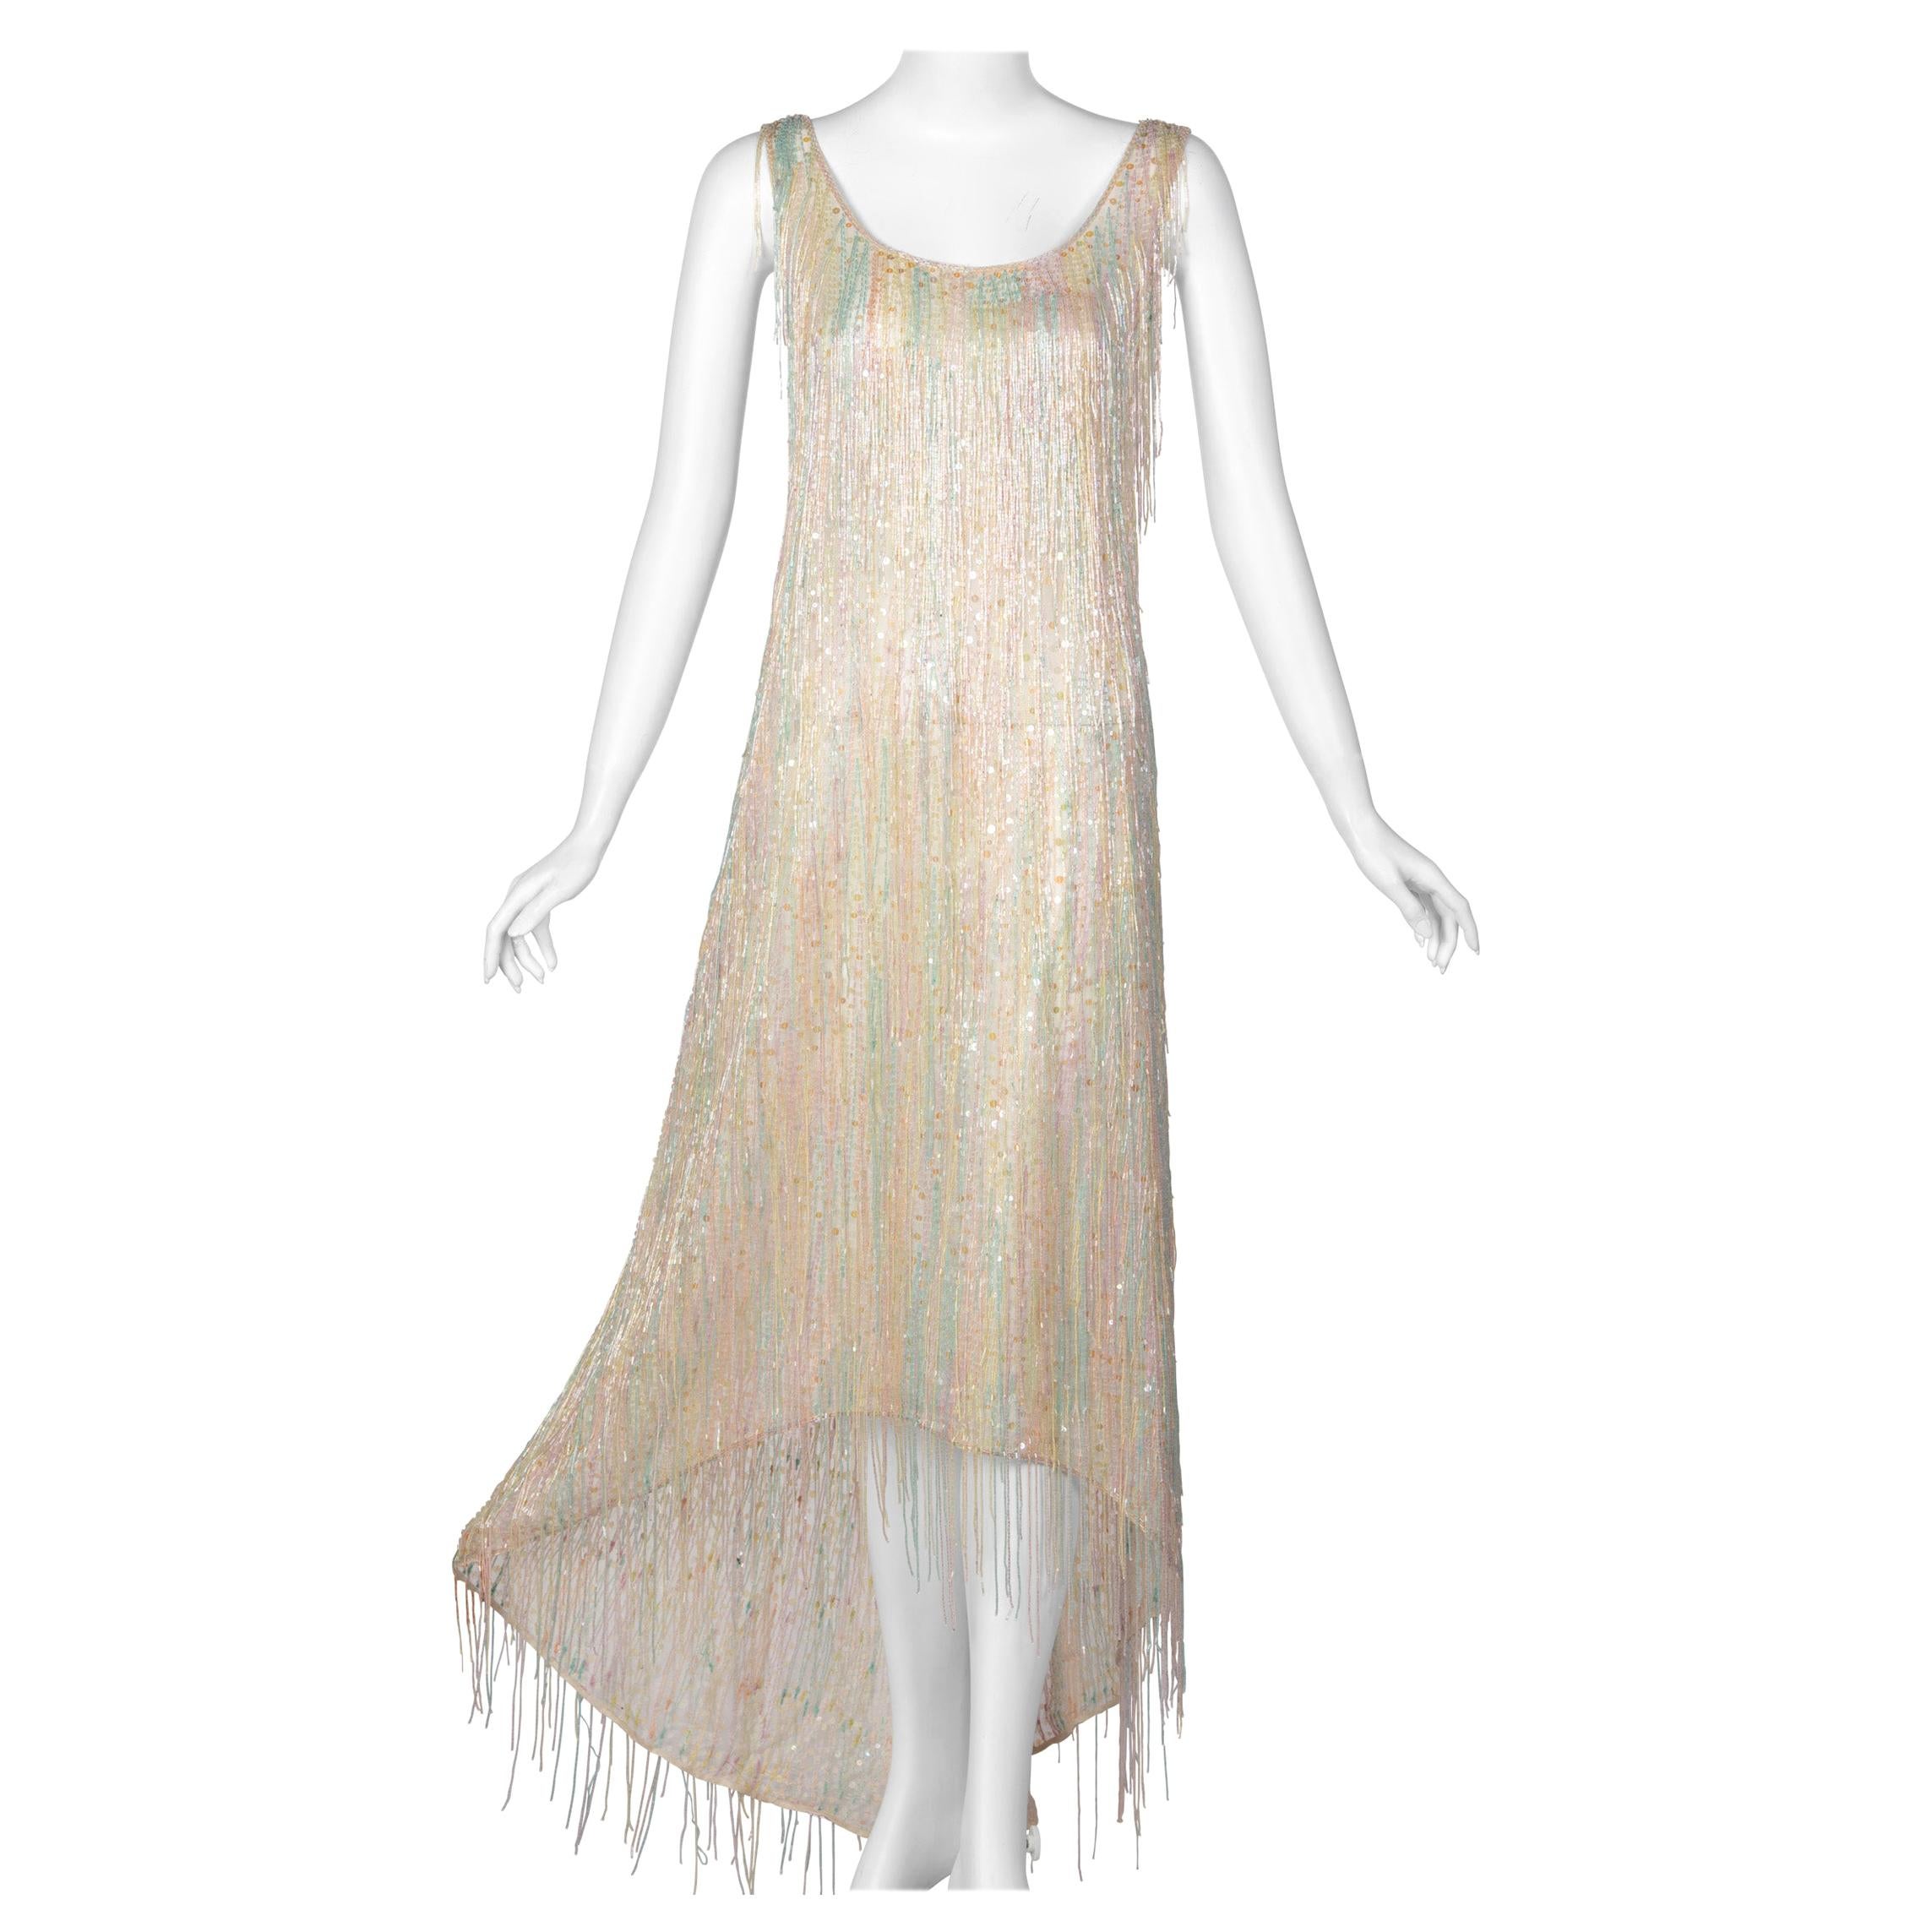 Halston Couture Pastel Rainbow Hand Beaded -Sequin Silk Dress Gown, 1970s